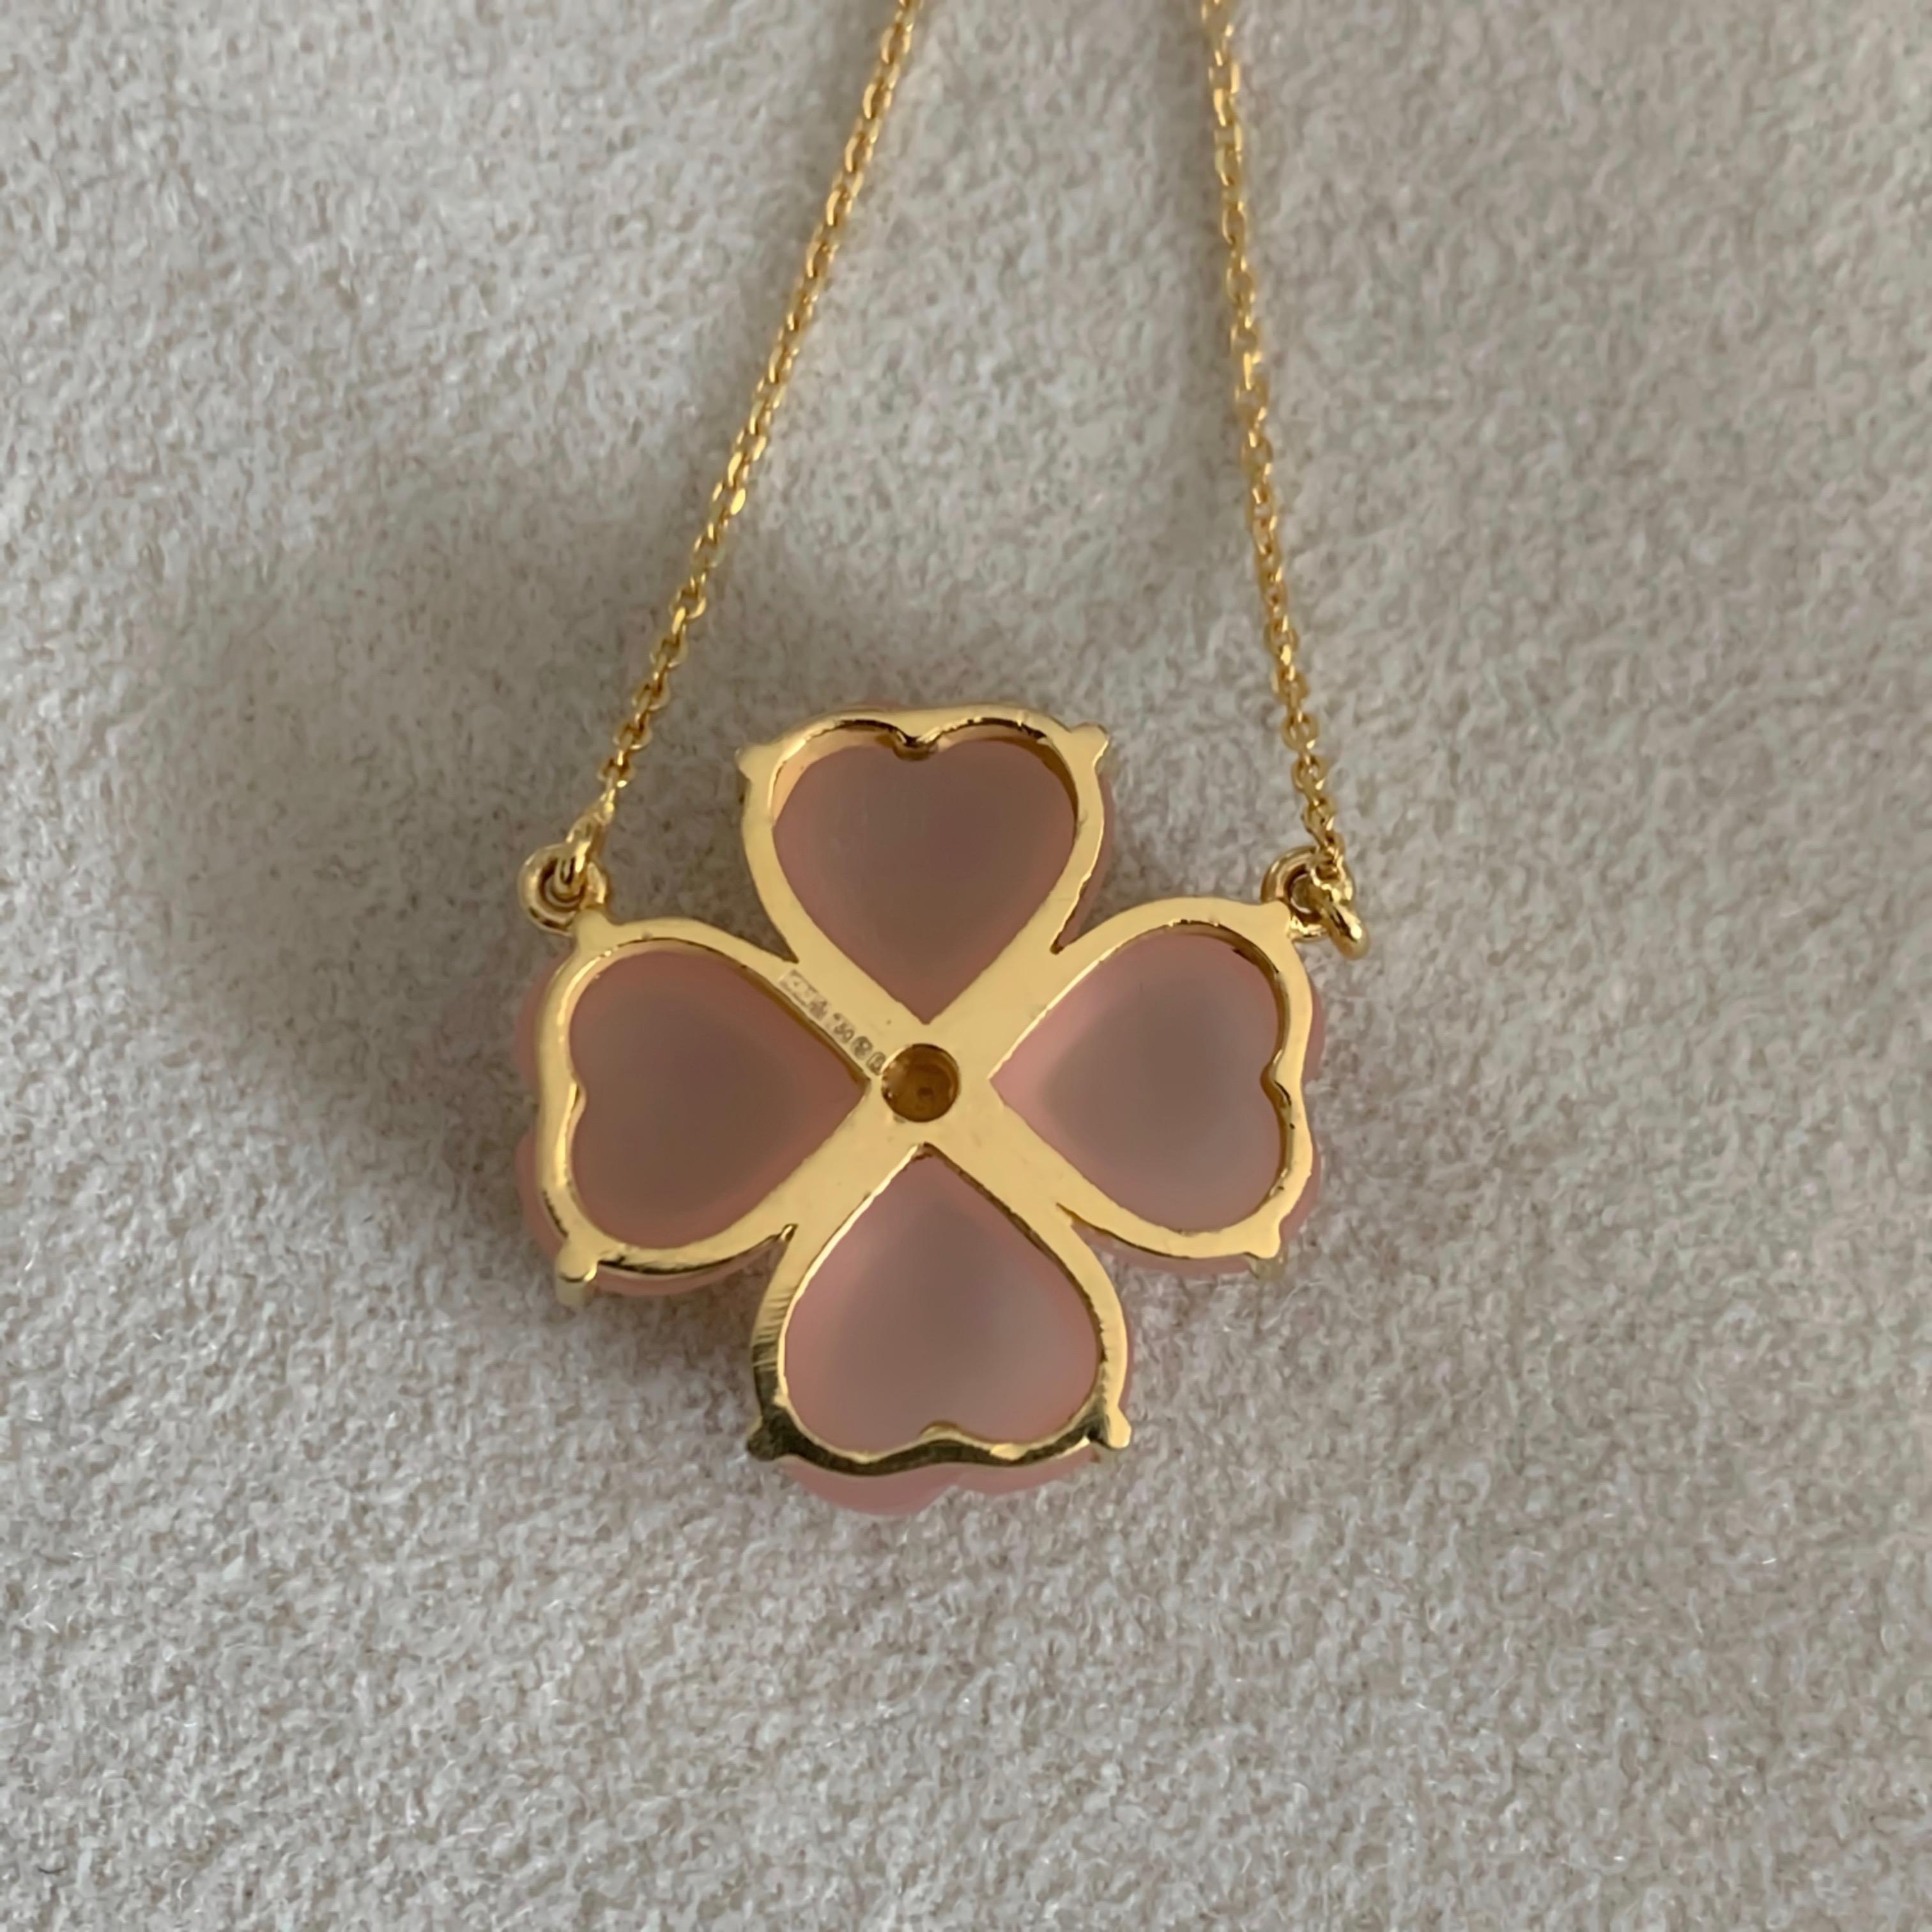 Women's Handmade 18 Karat Solid Yellow Gold Pink Chalcedony Clover Pendant Necklace For Sale